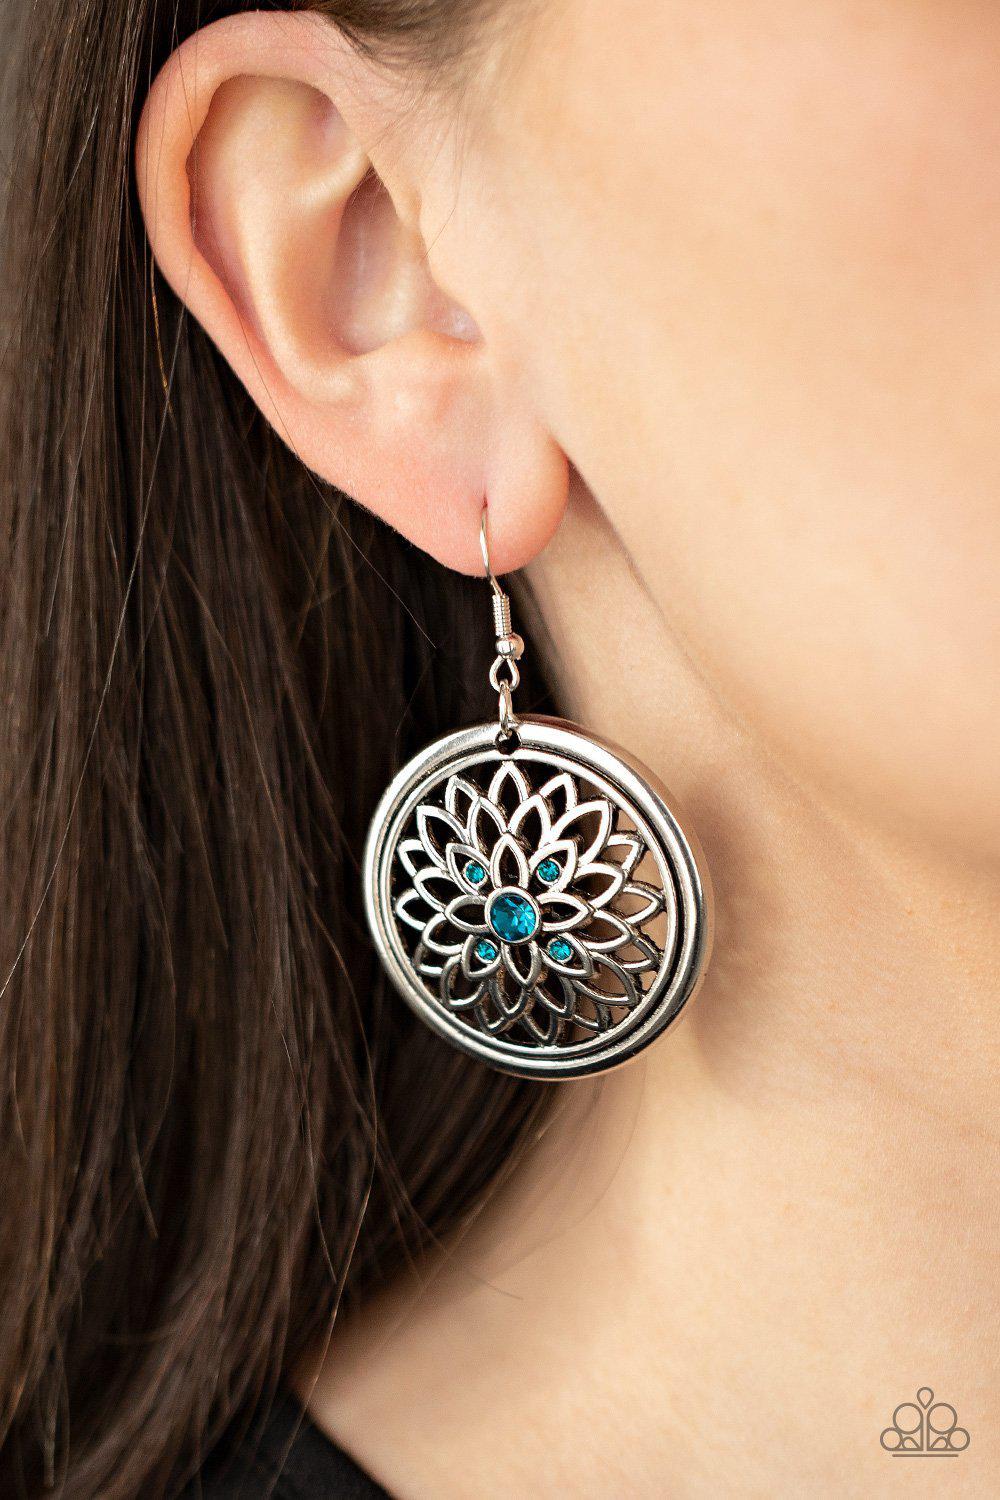 Mega Medallions Blue Rhinestone and Silver Filigree Earrings - Paparazzi Accessories- model - CarasShop.com - $5 Jewelry by Cara Jewels